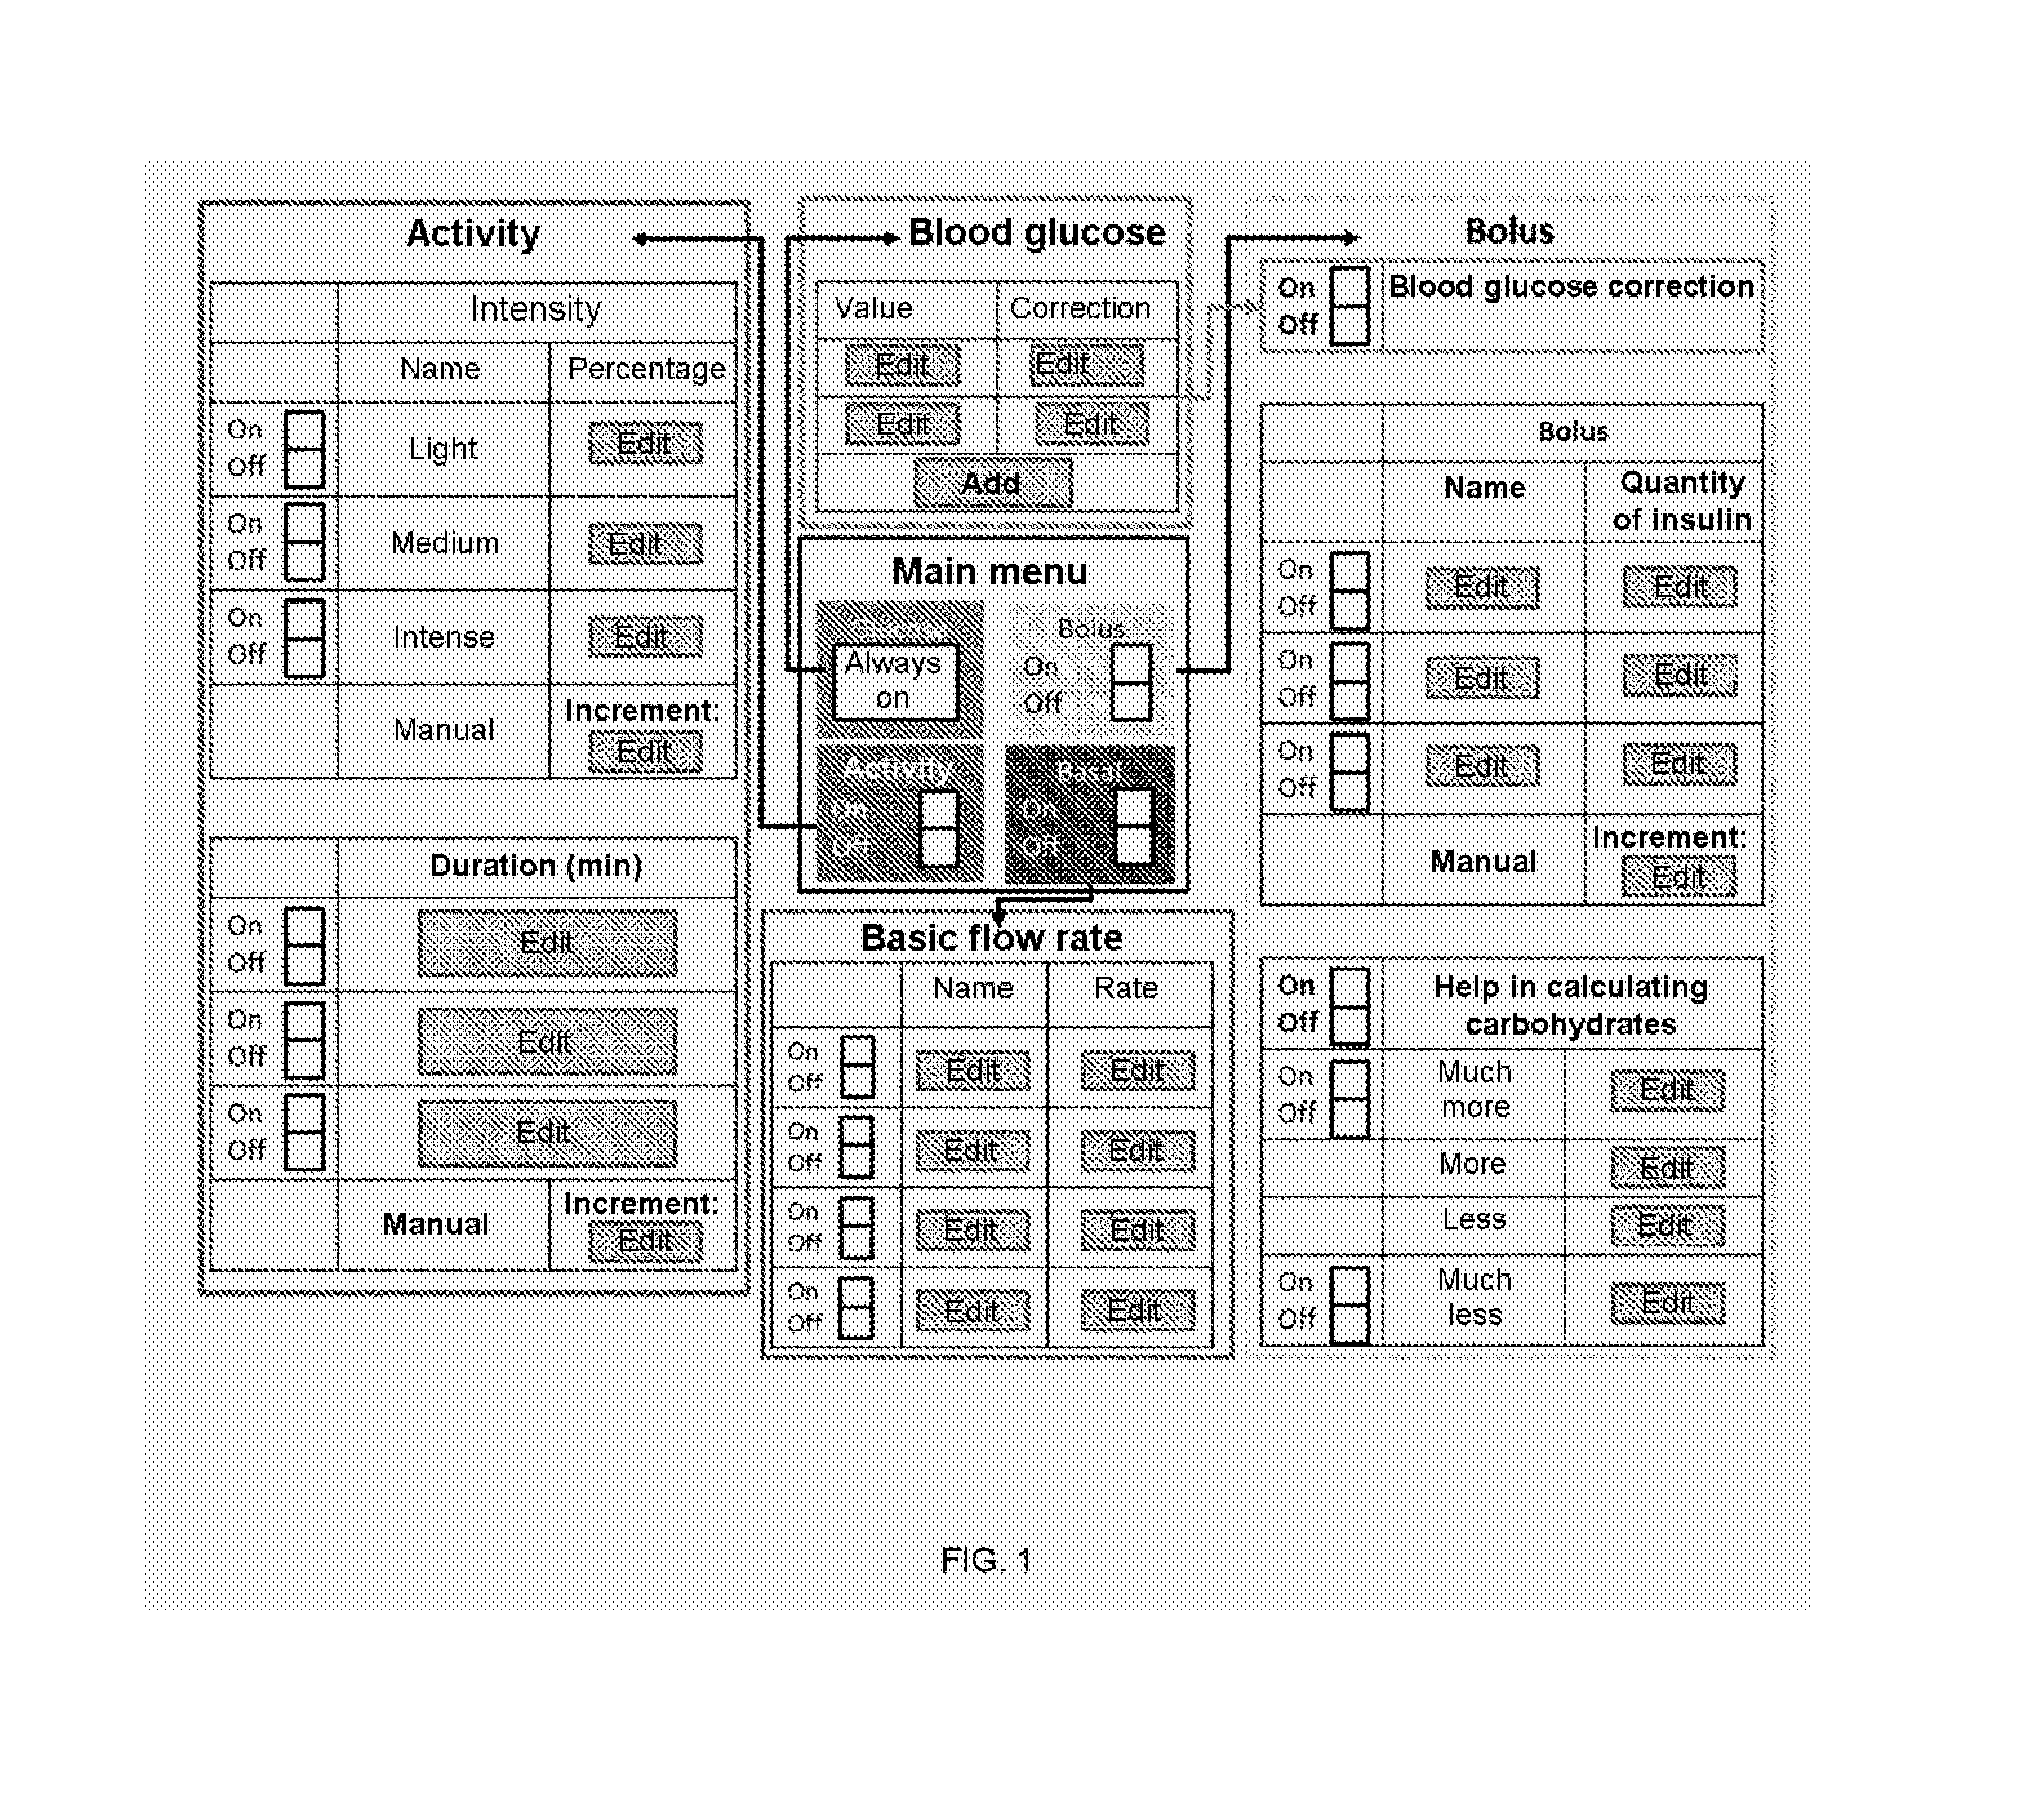 Control Device with Recommendations